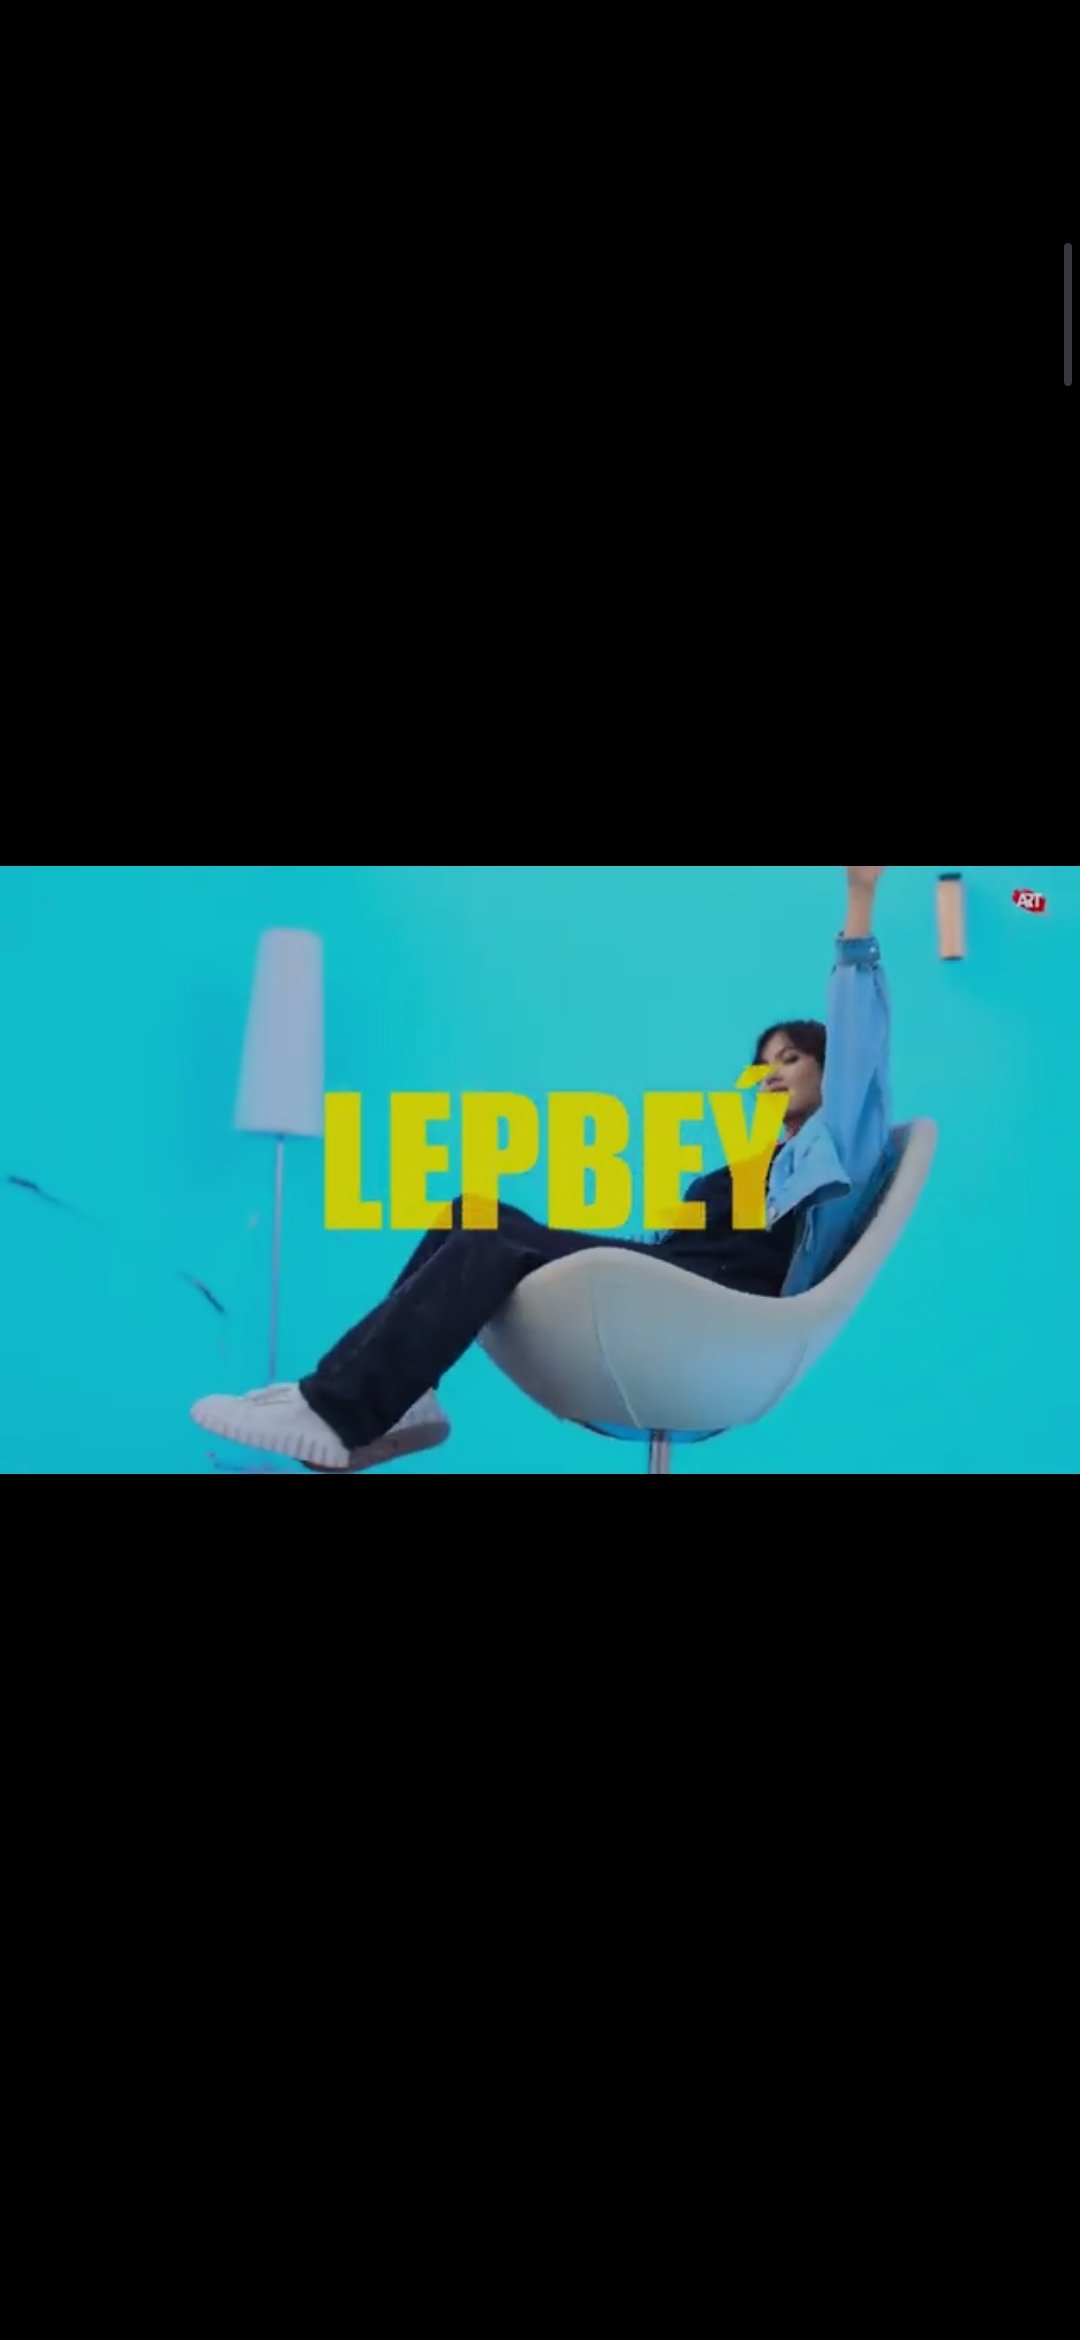 Sbeater - lepbey official video